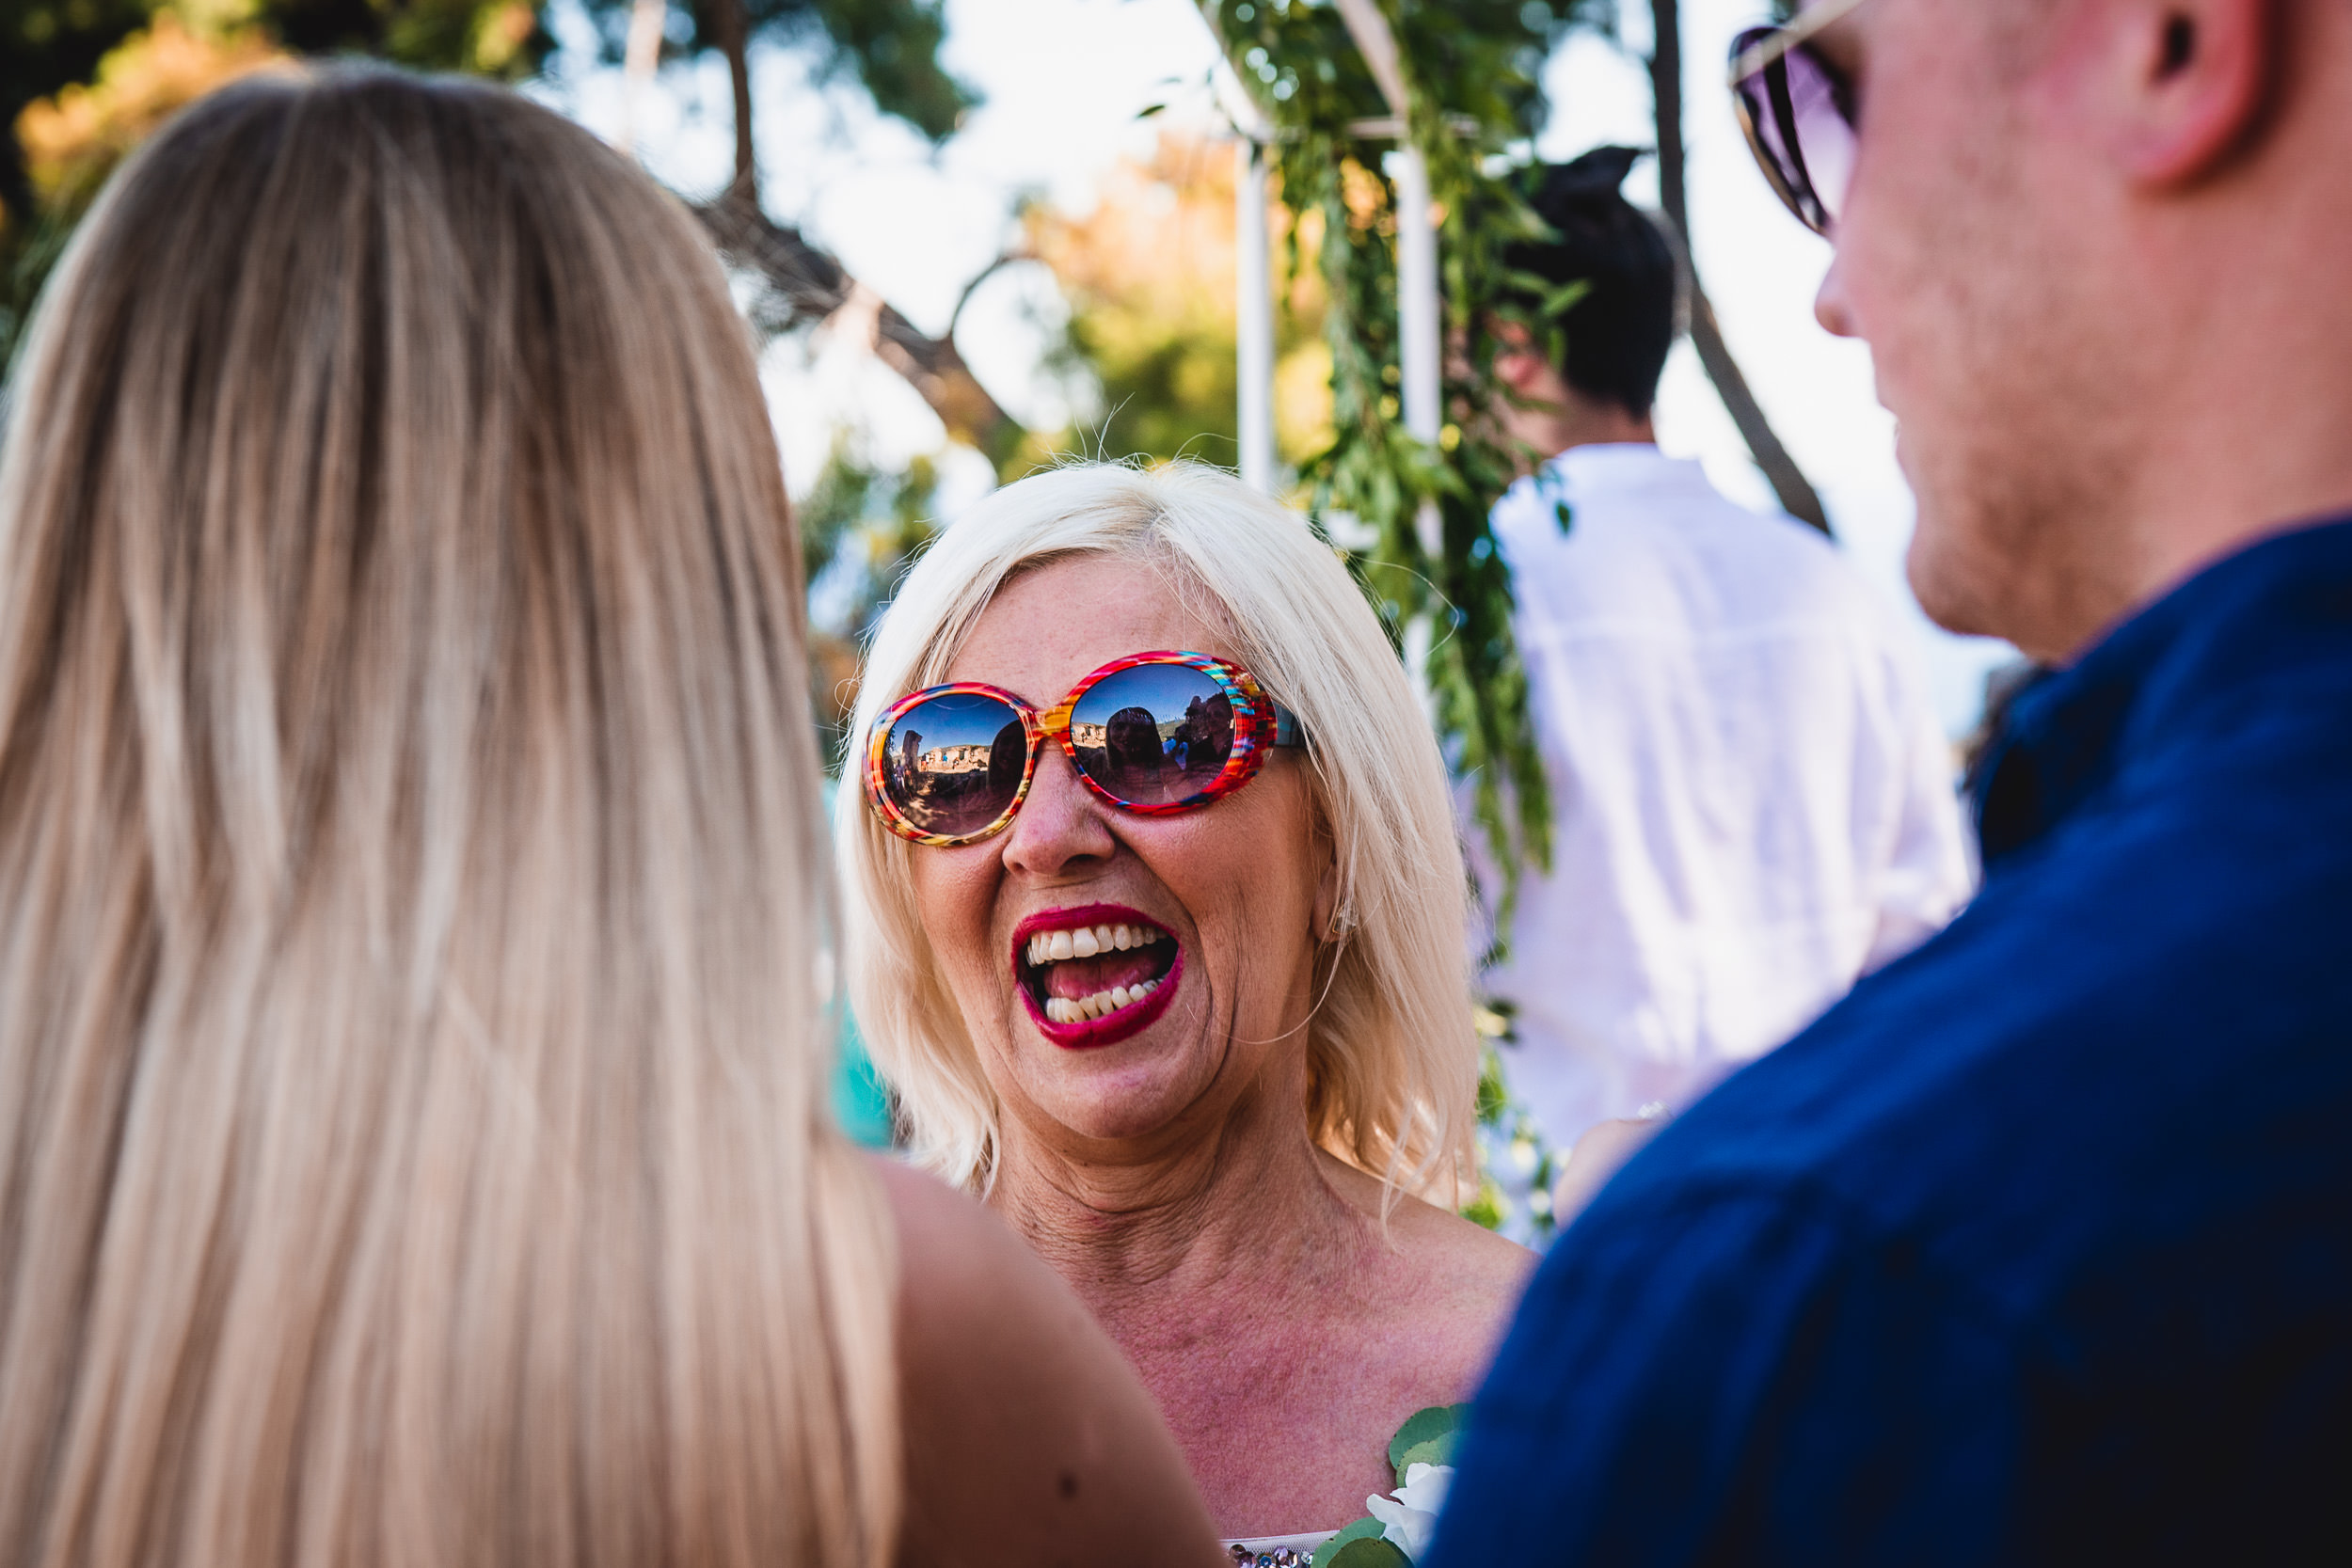 A bride wearing sunglasses is talking to the groom at an outdoor wedding photo shoot.